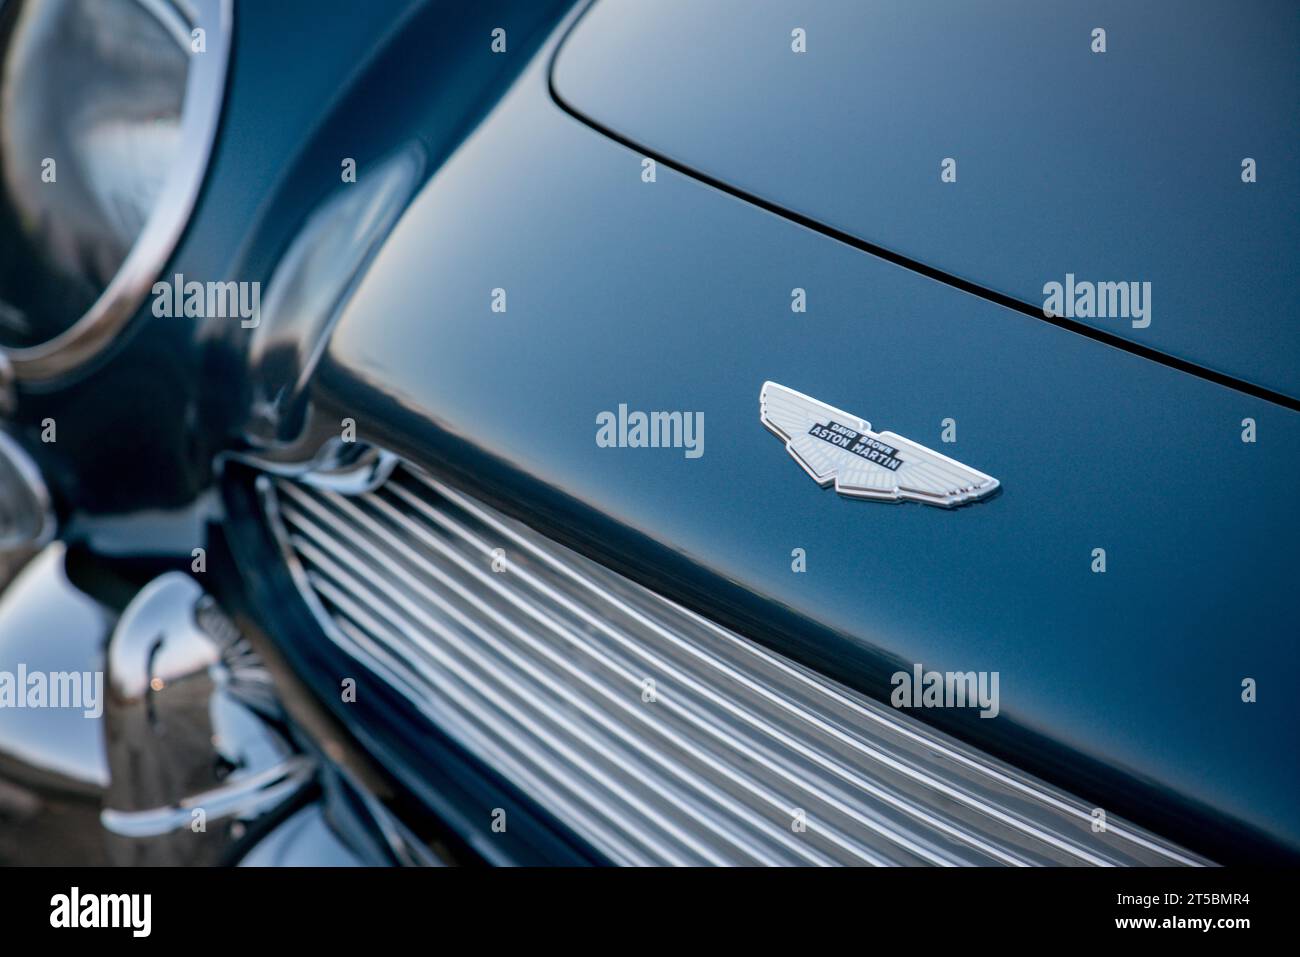 1965 Aston Martin DB5, marque, badge and grille detail view Stock Photo